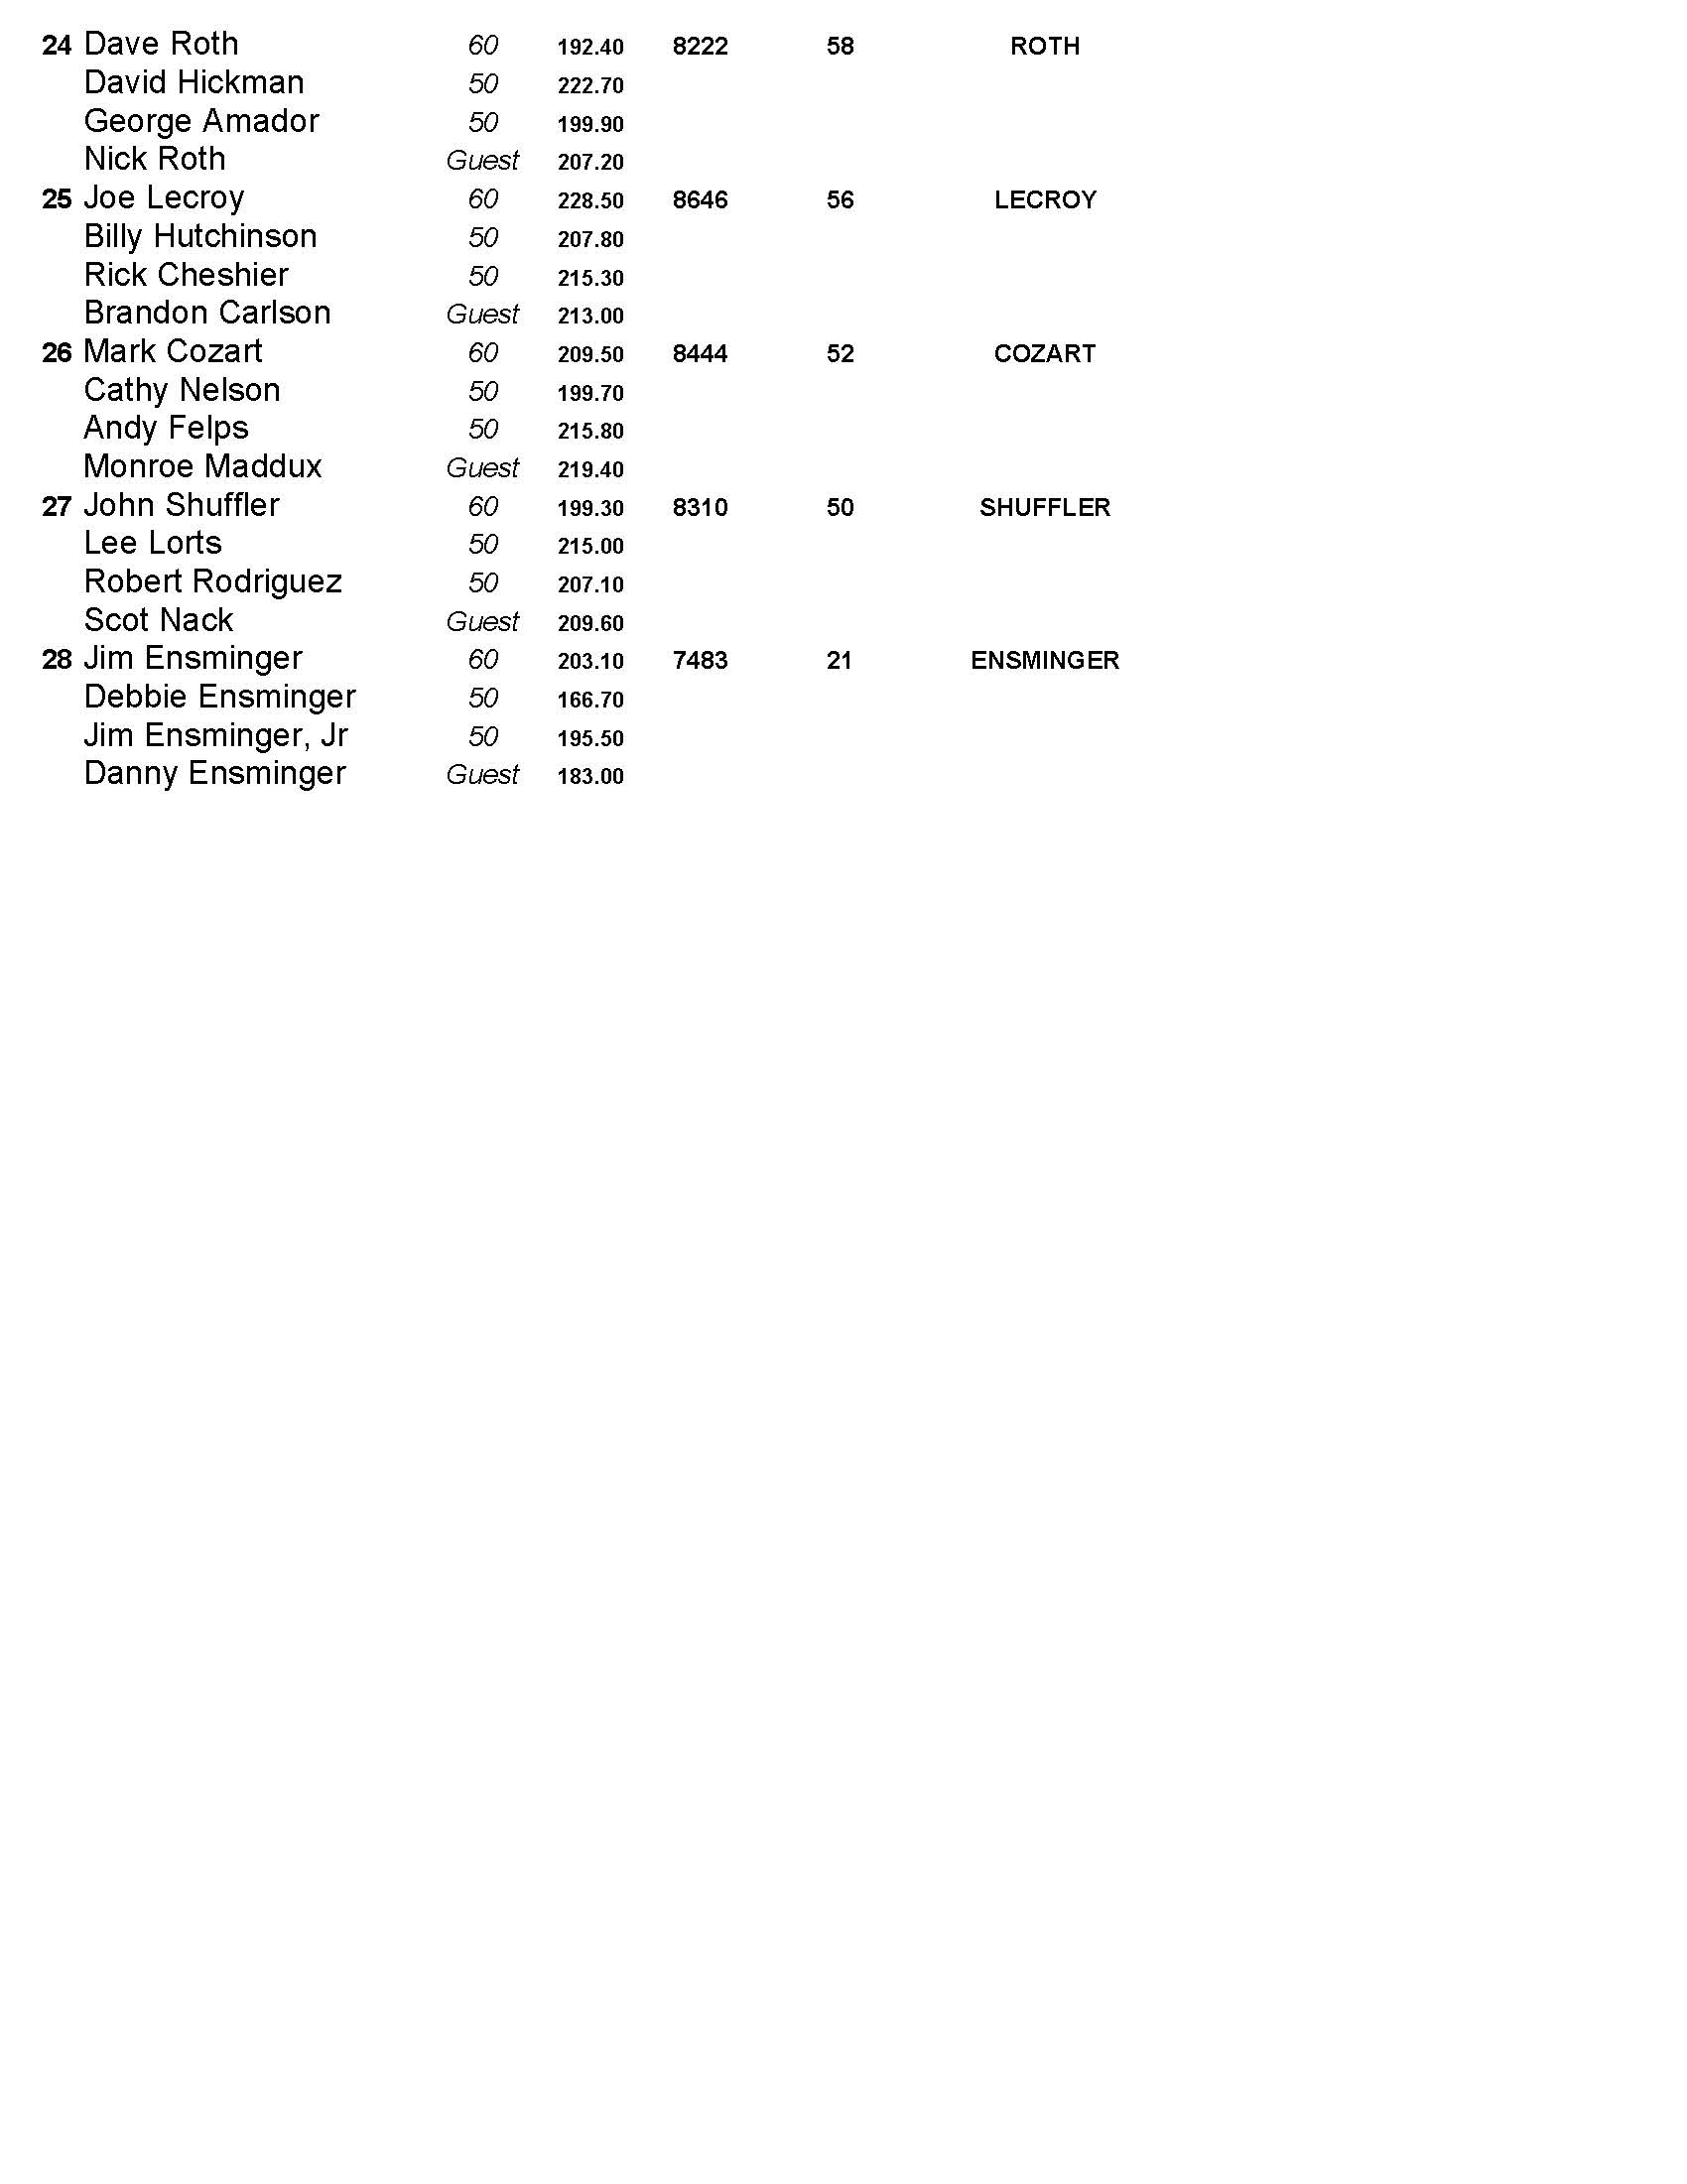 08202023results_Page_3